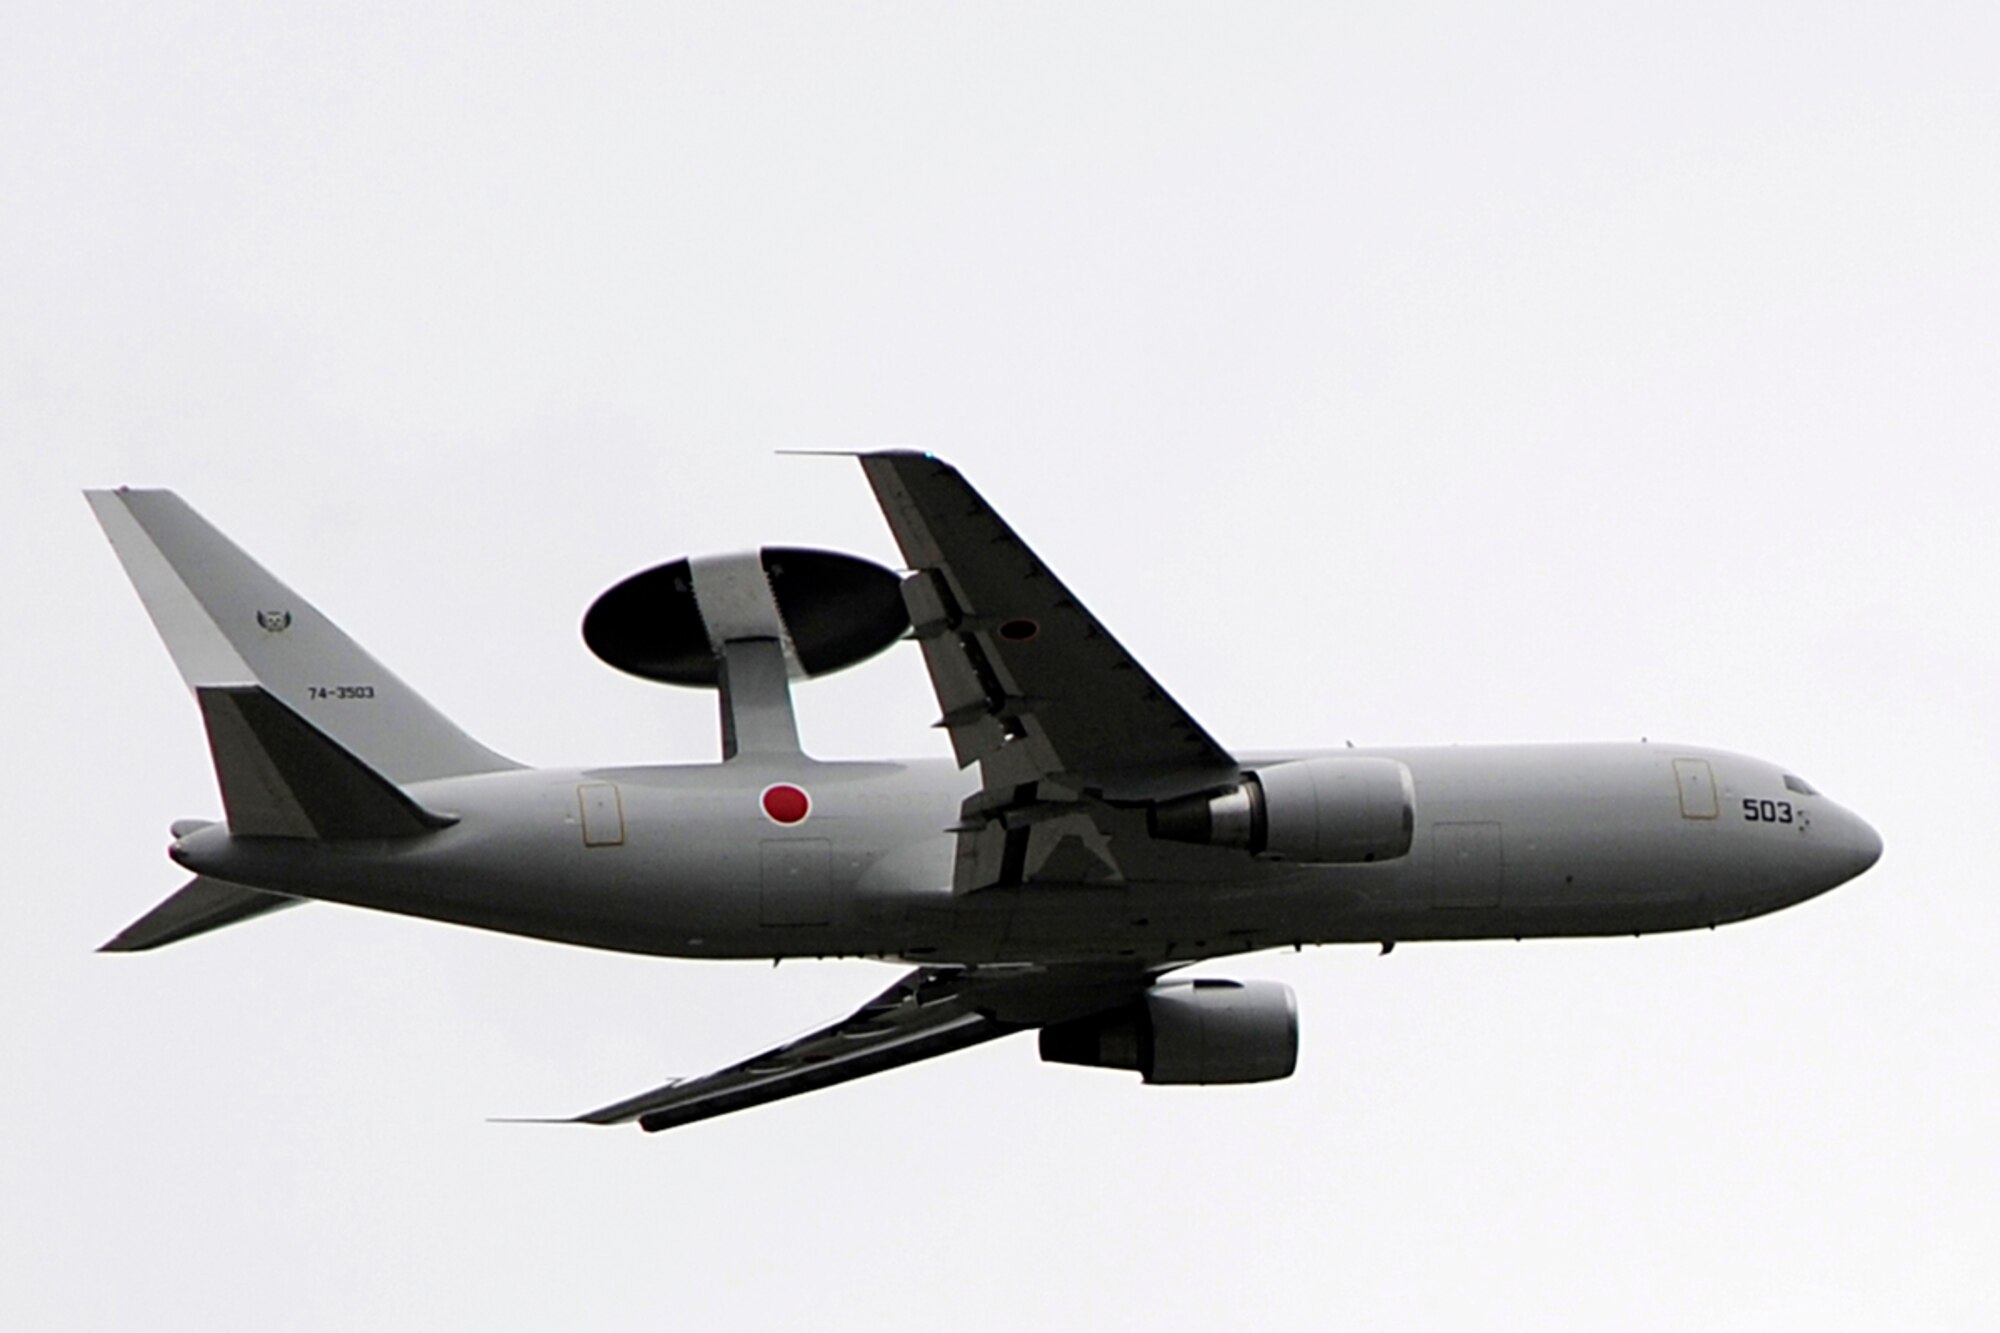 A Japanese airborne early warning and control system E-767 flies over Joint Base Elmendorf-Richardson June 13 during Red Flag - Alaska. The E-767 can fly at about 832 kilometers an hour and has a range of 9,000 kilometers with a crew of 20 members. Red-Flag Alaska is designed to strengthen bilateral ties between nations and offers the JASDF the opportunity to improve aerial tactics. (U.S. Air Force photo/Staff Sgt. Zachary Wolf)